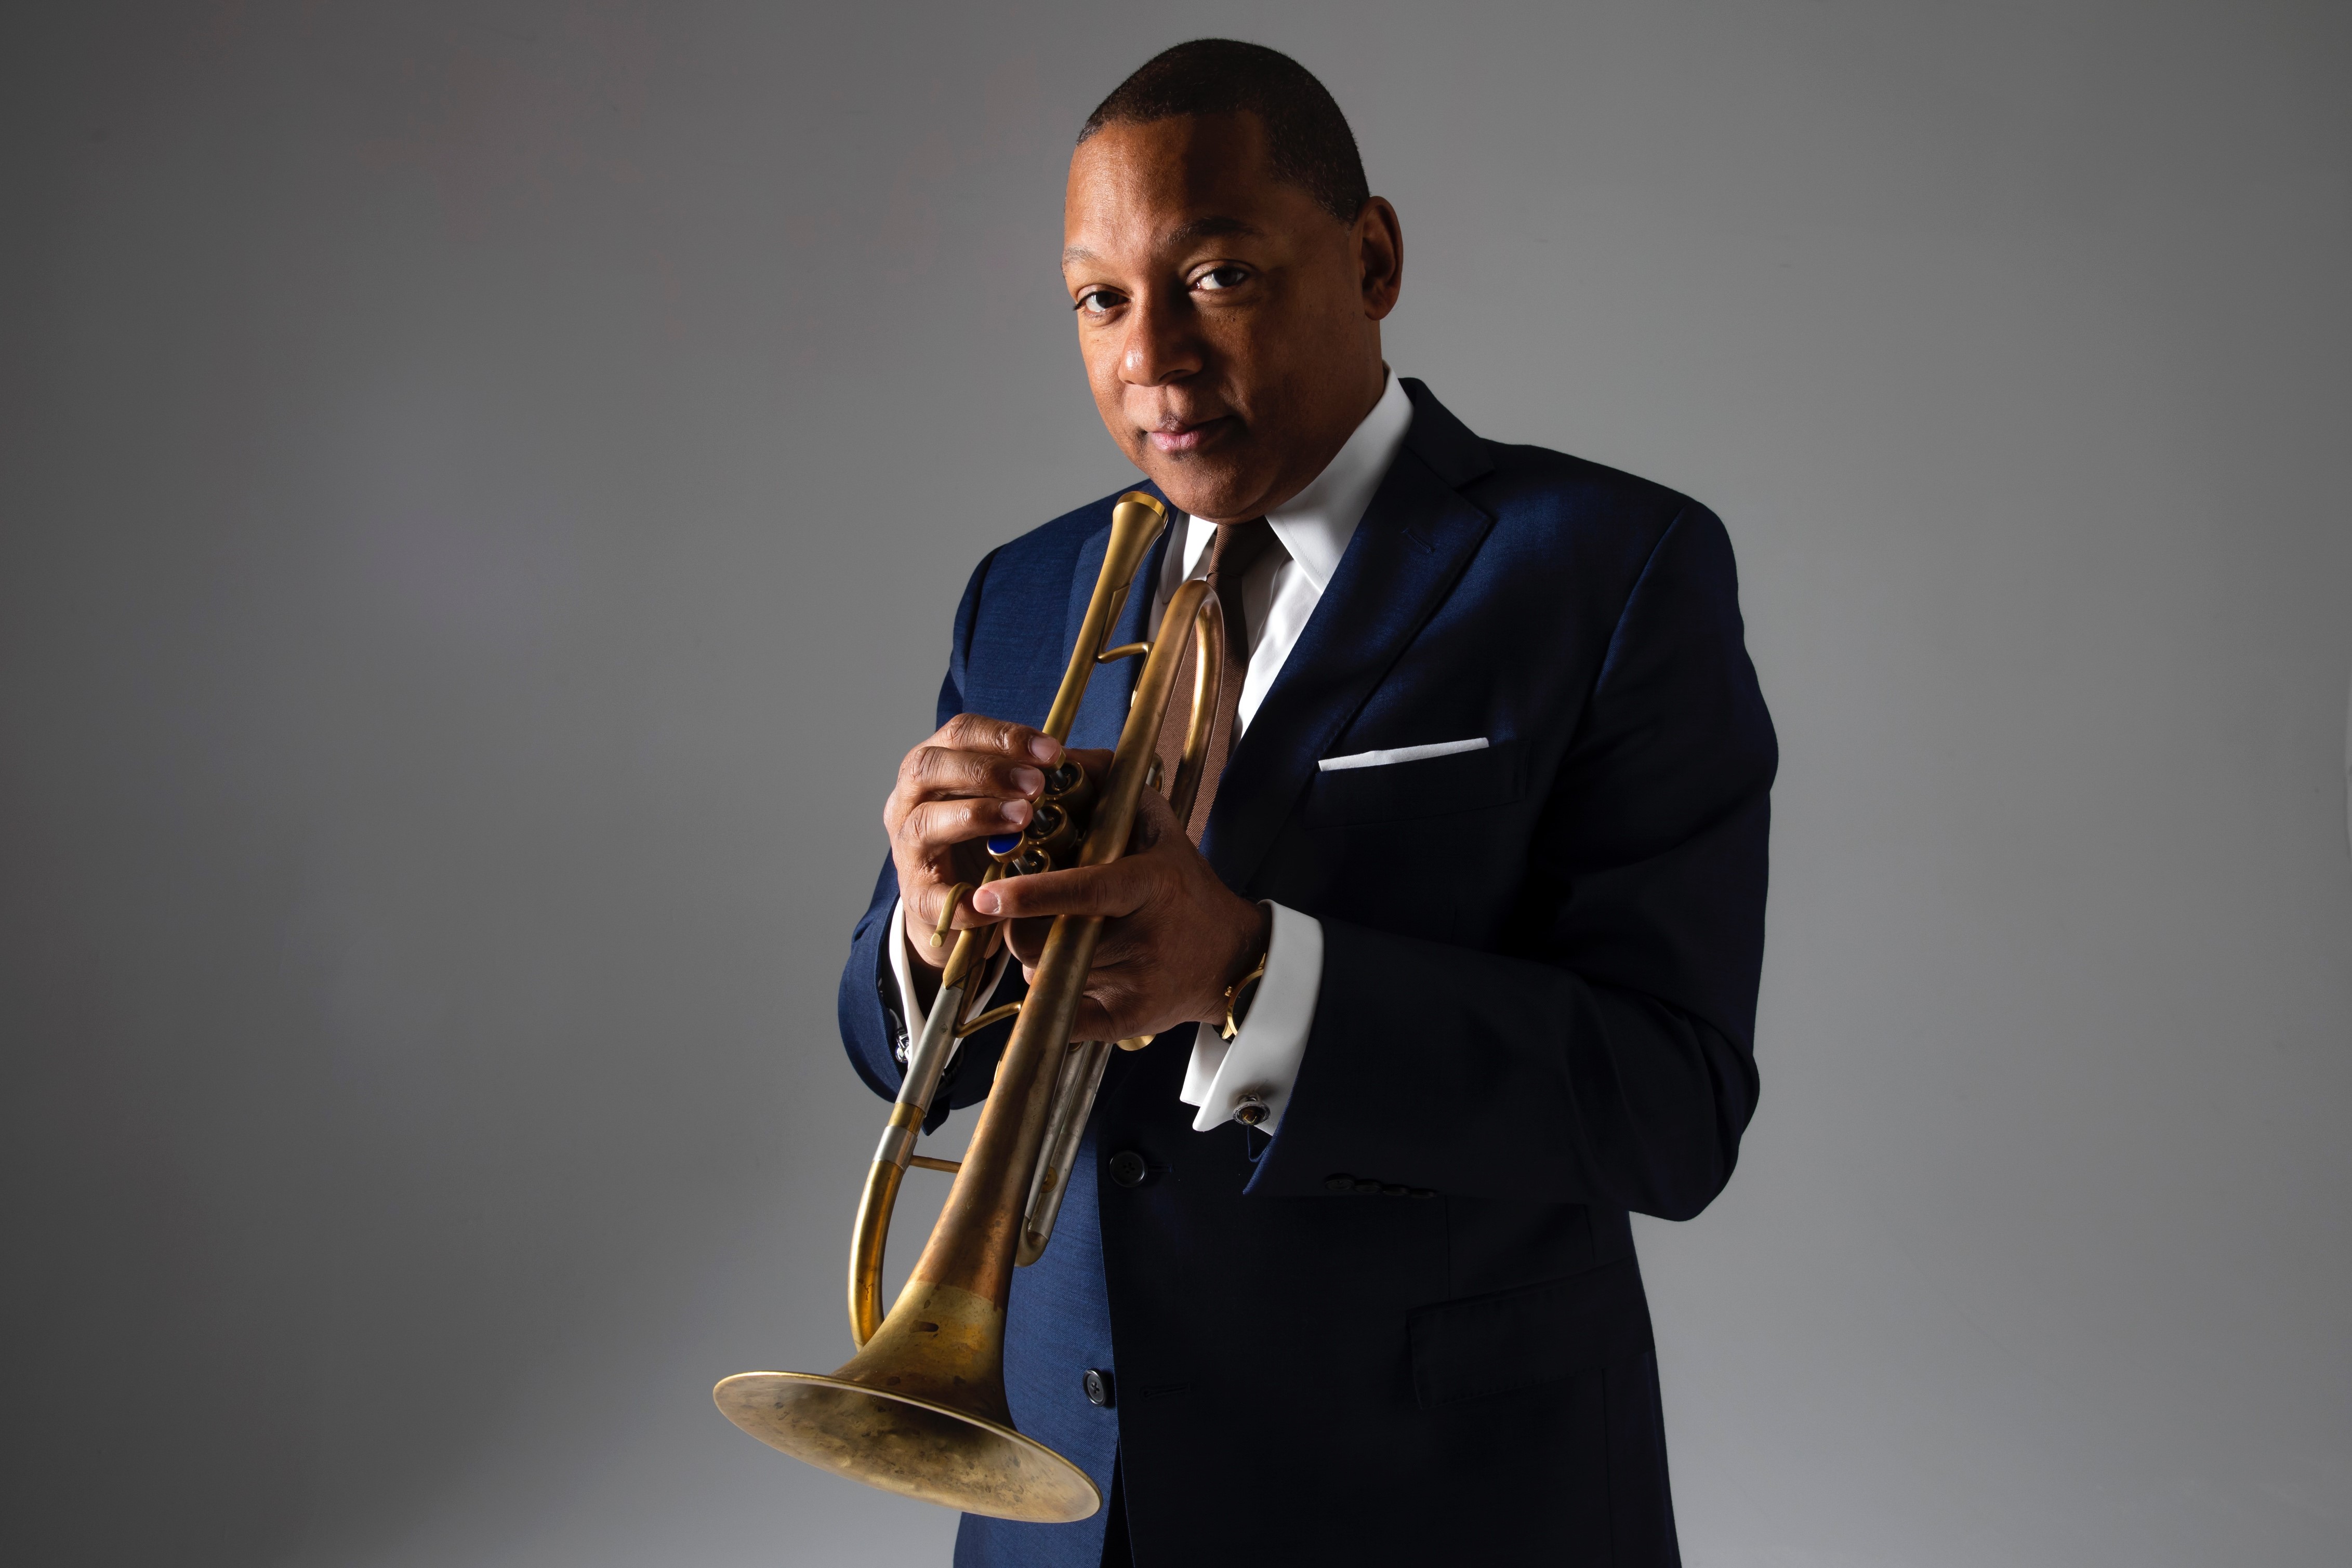 Photo of the trumpet player Wynton Marsalis holding his horn in a blue navy suit.